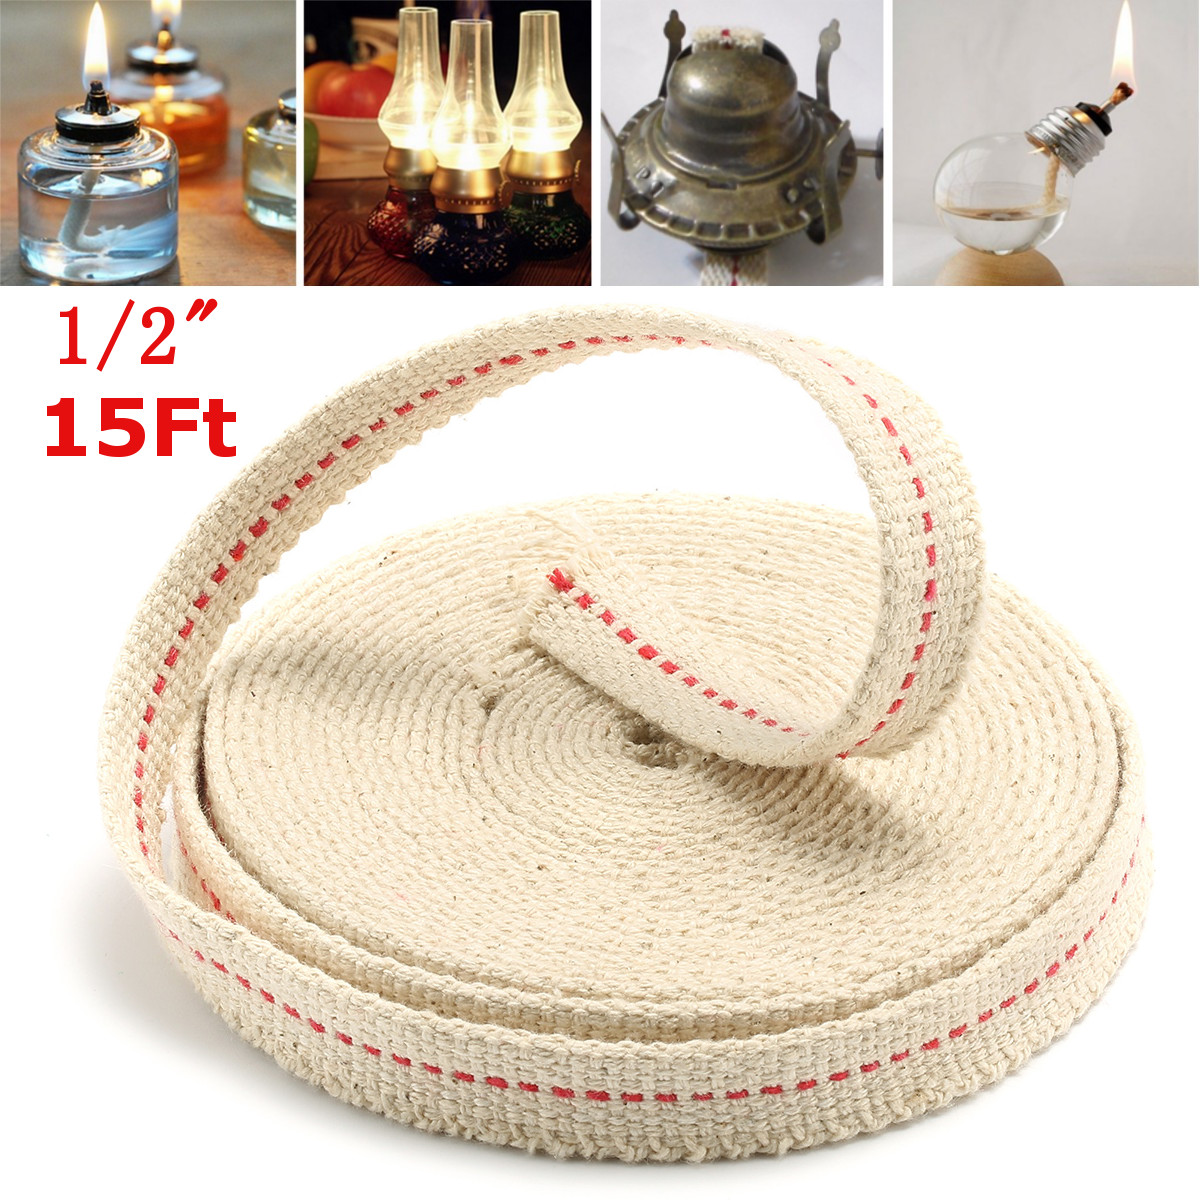 12-Inch-Flat-Cotton-Wick-15-Foot-Oil-Lamps-and-Lanterns-Cotton-Wick-45M-Length-1128942-1